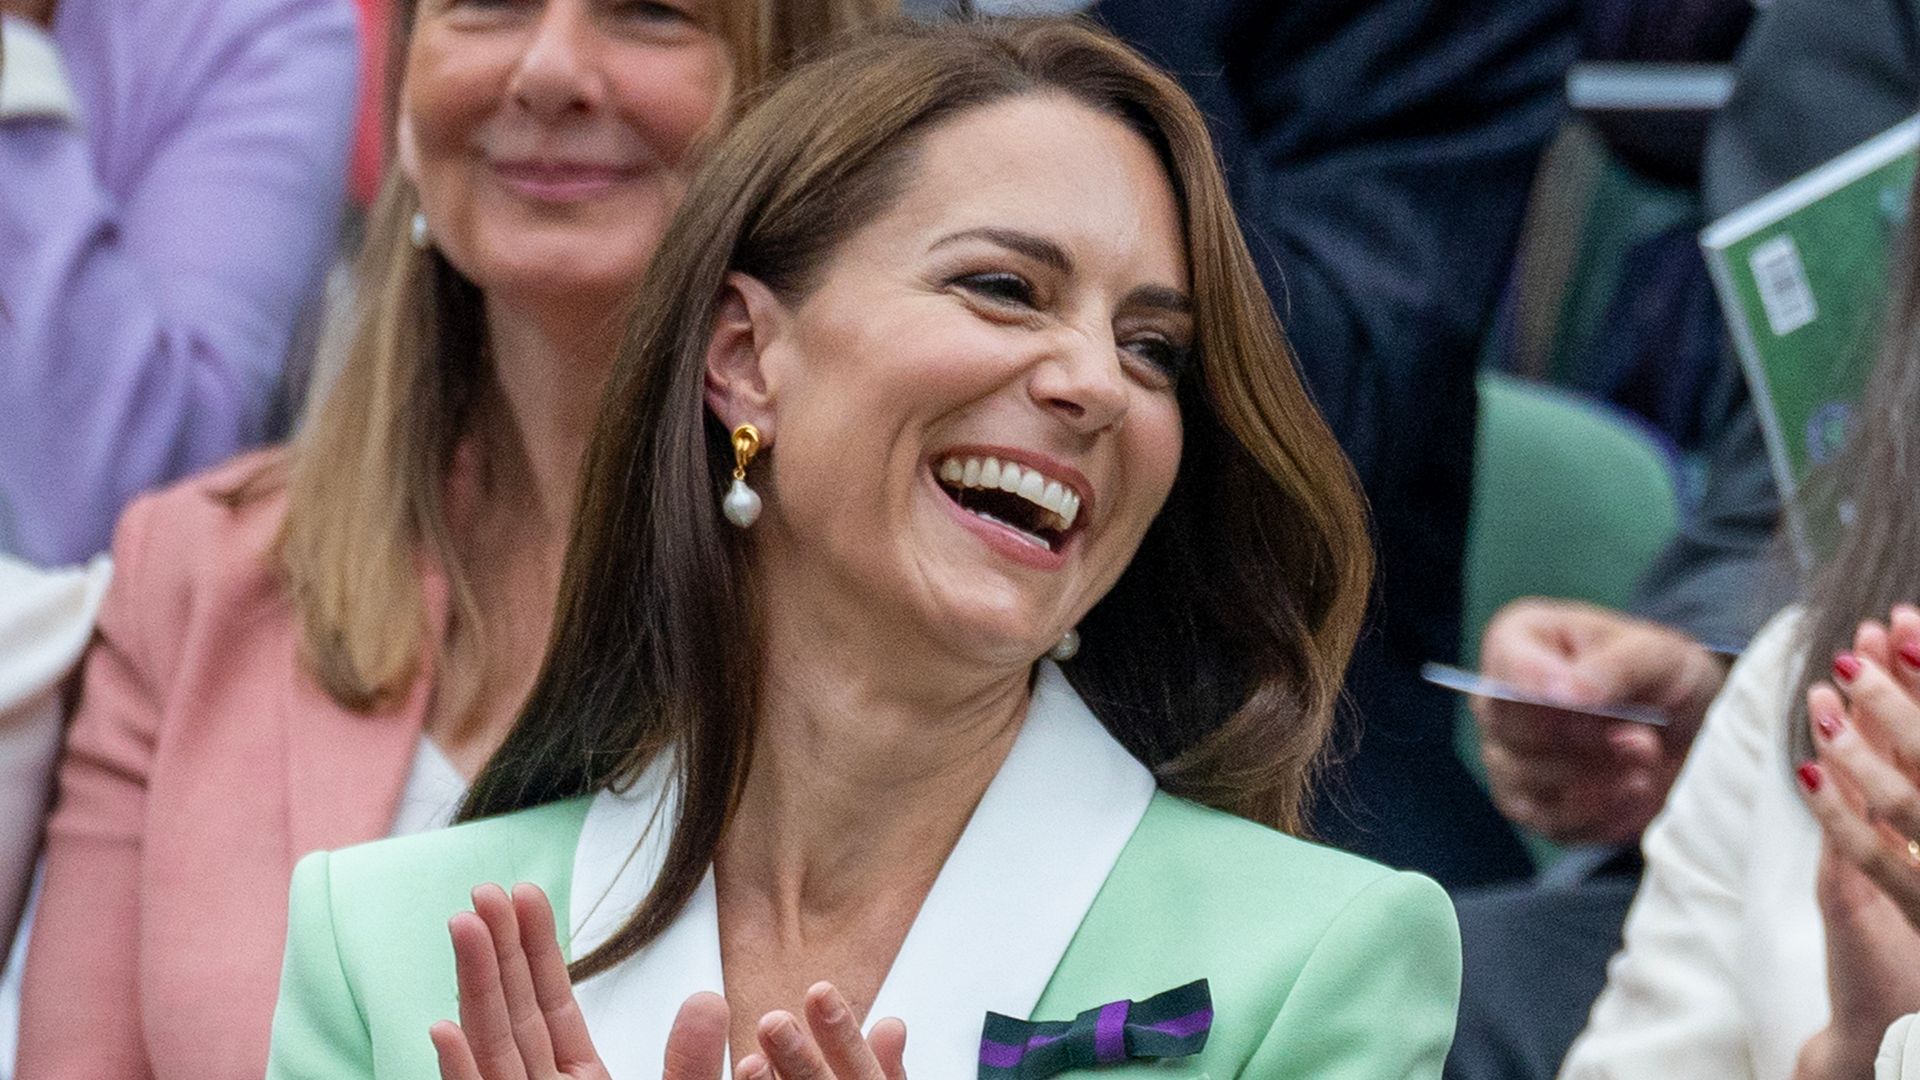 kate middleton clapping in Centre Court's Royal Box